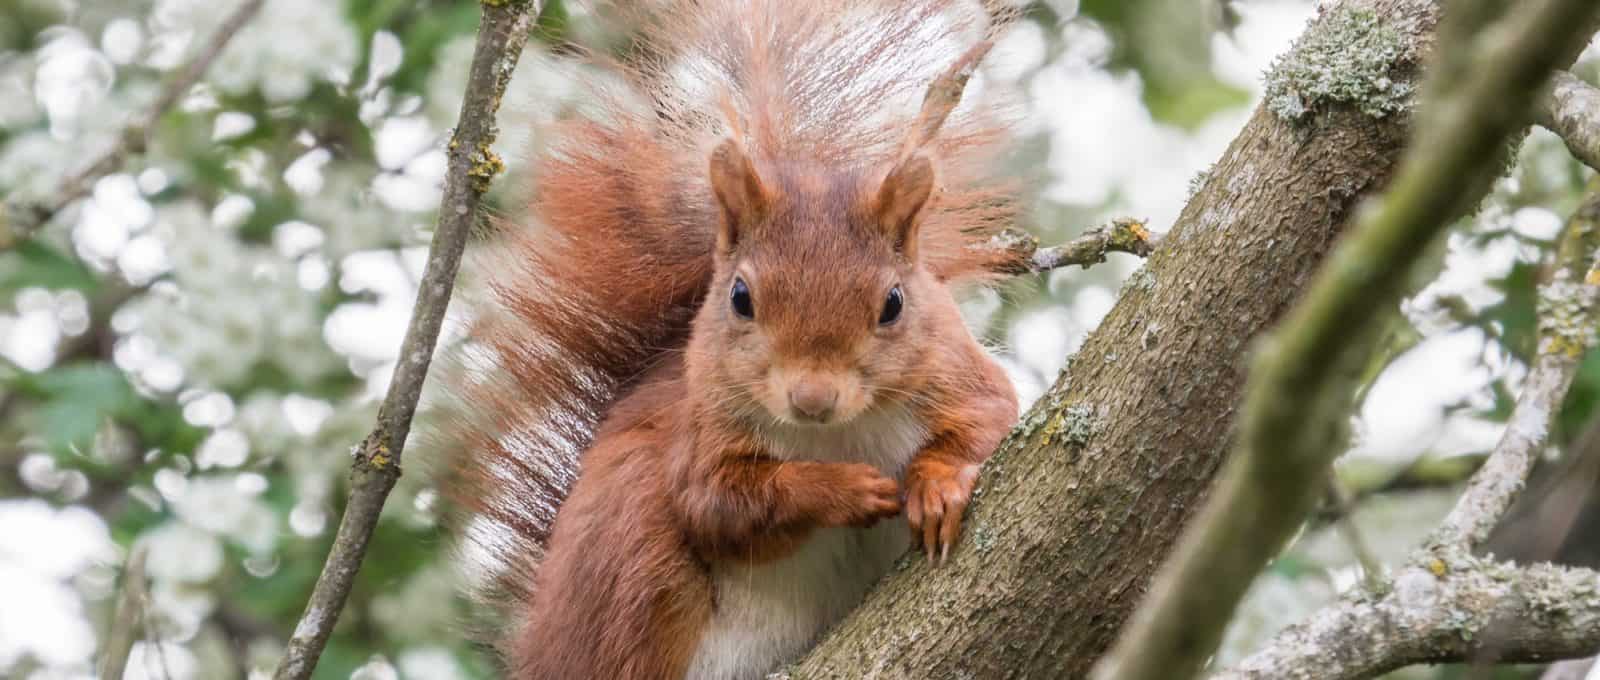 Cute portrait of a European Red Squirrel sitting on a branch and looking directly at the camera